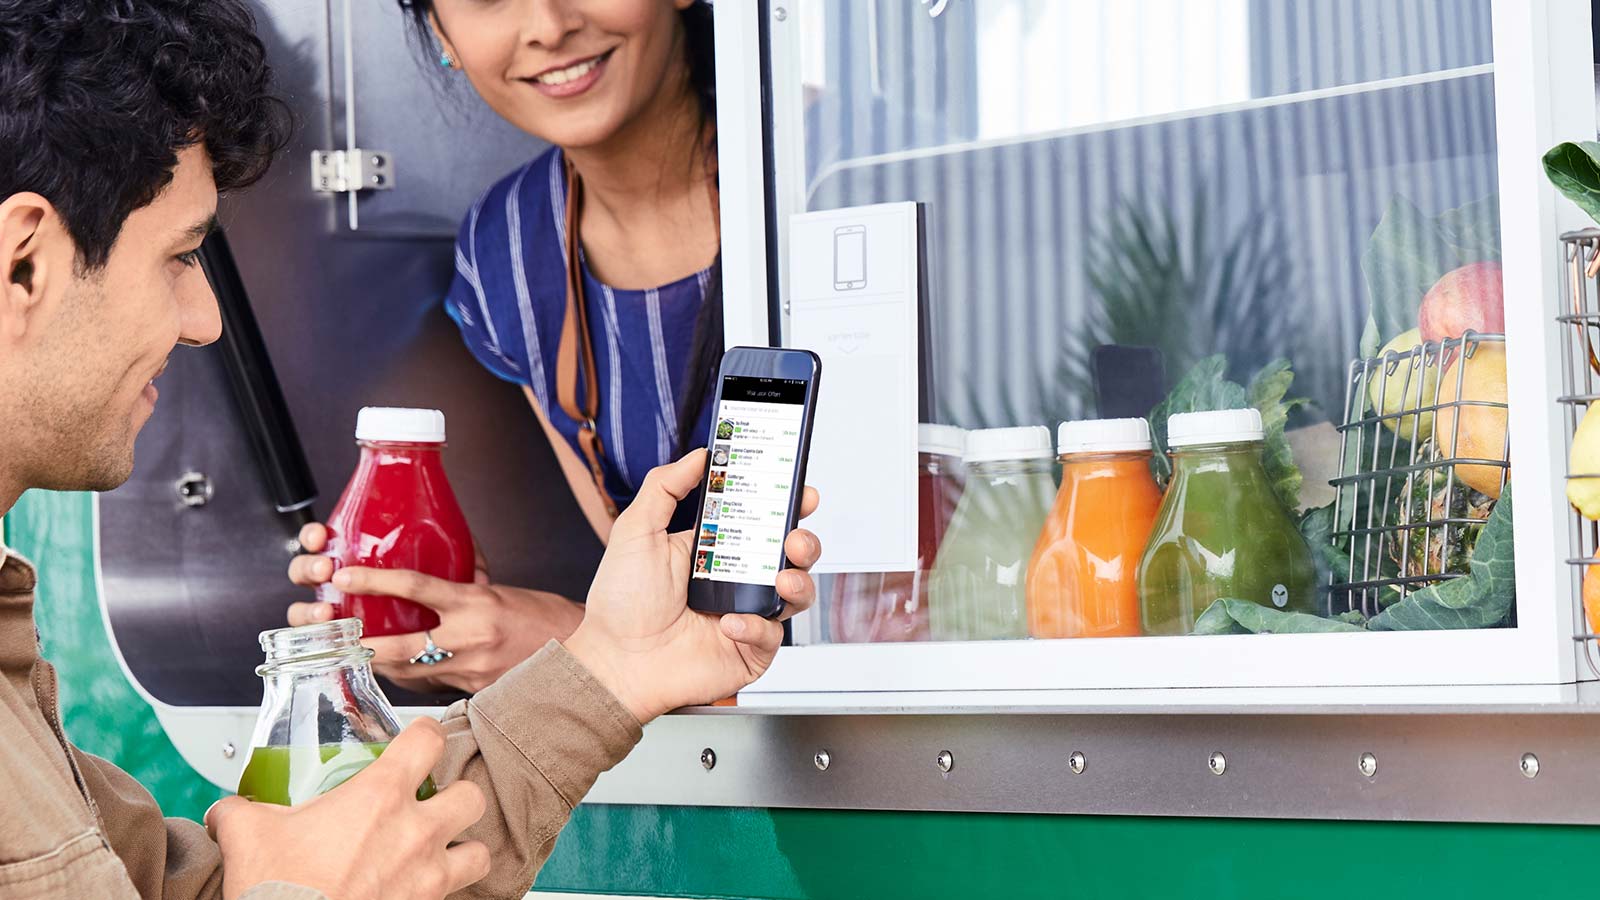 Man looking at his mobile phone while standing near a food truck and woman smiling and serving him some sauce.